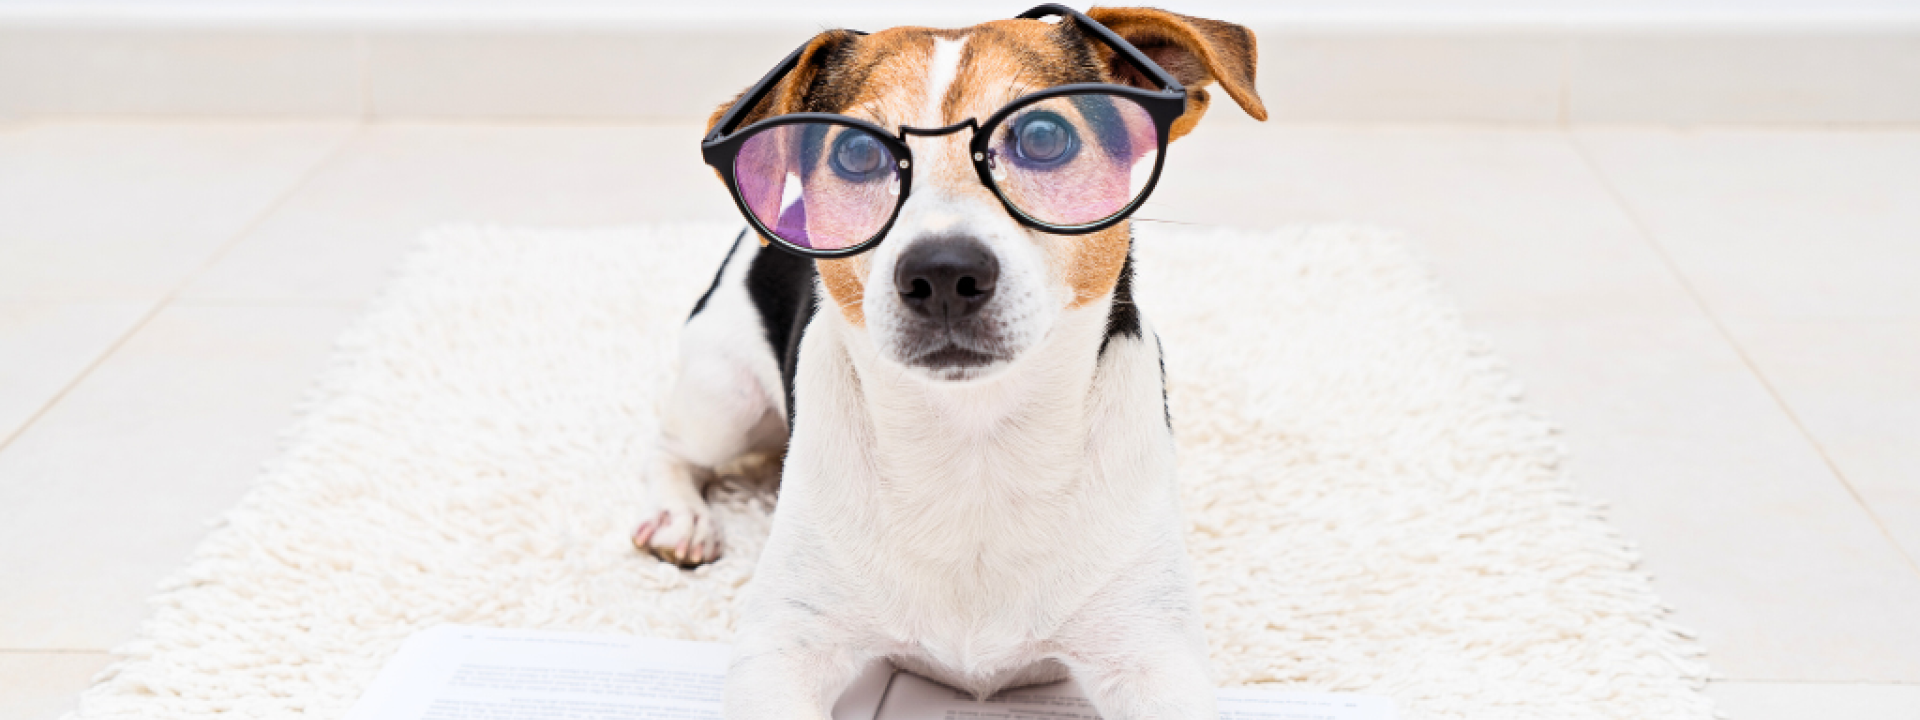 Dog with glasses and book